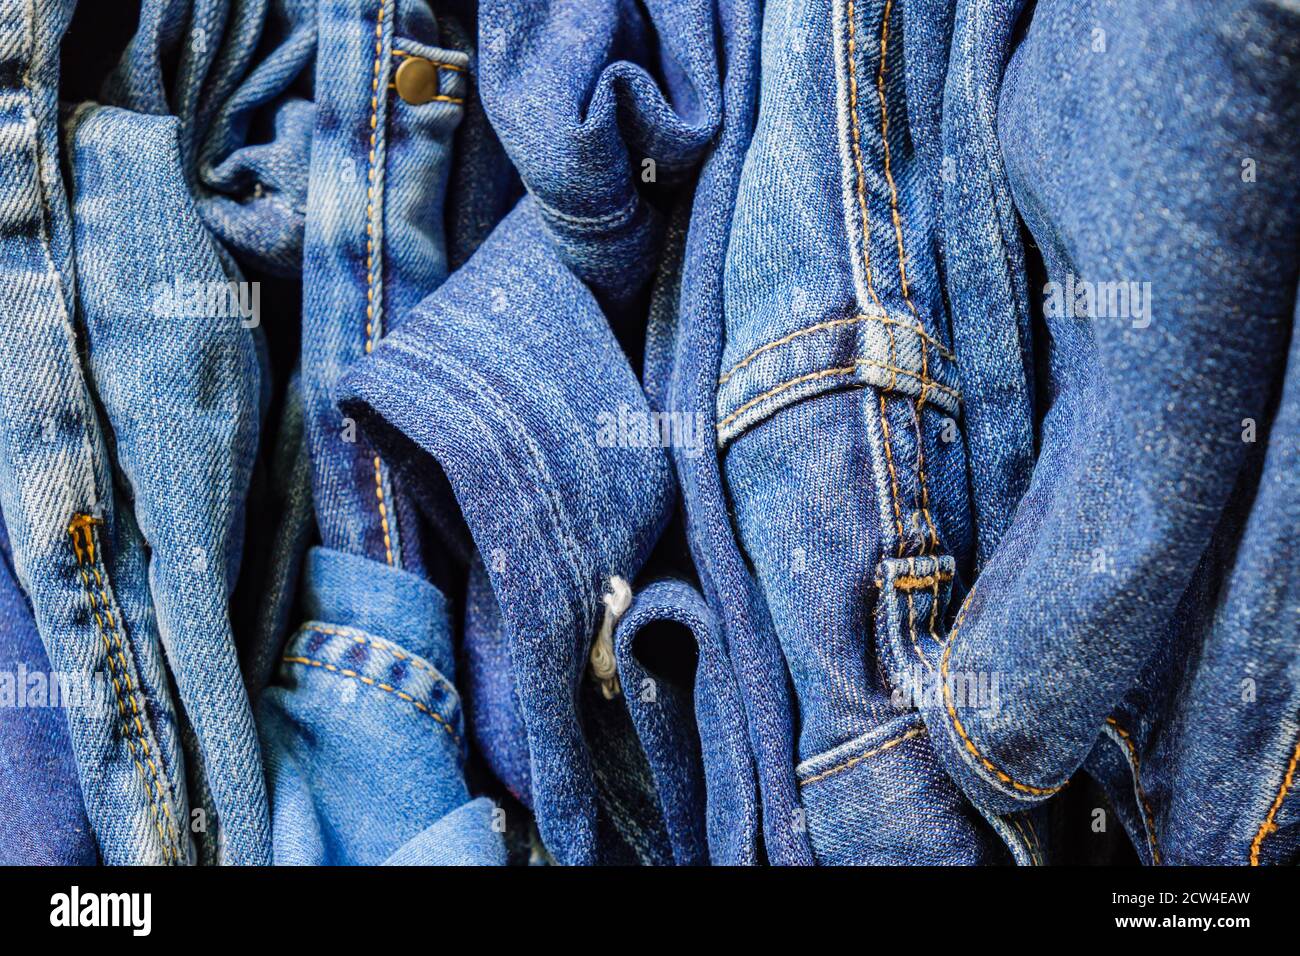 Premium Photo | Jeans texture and detail for background or wallpaper